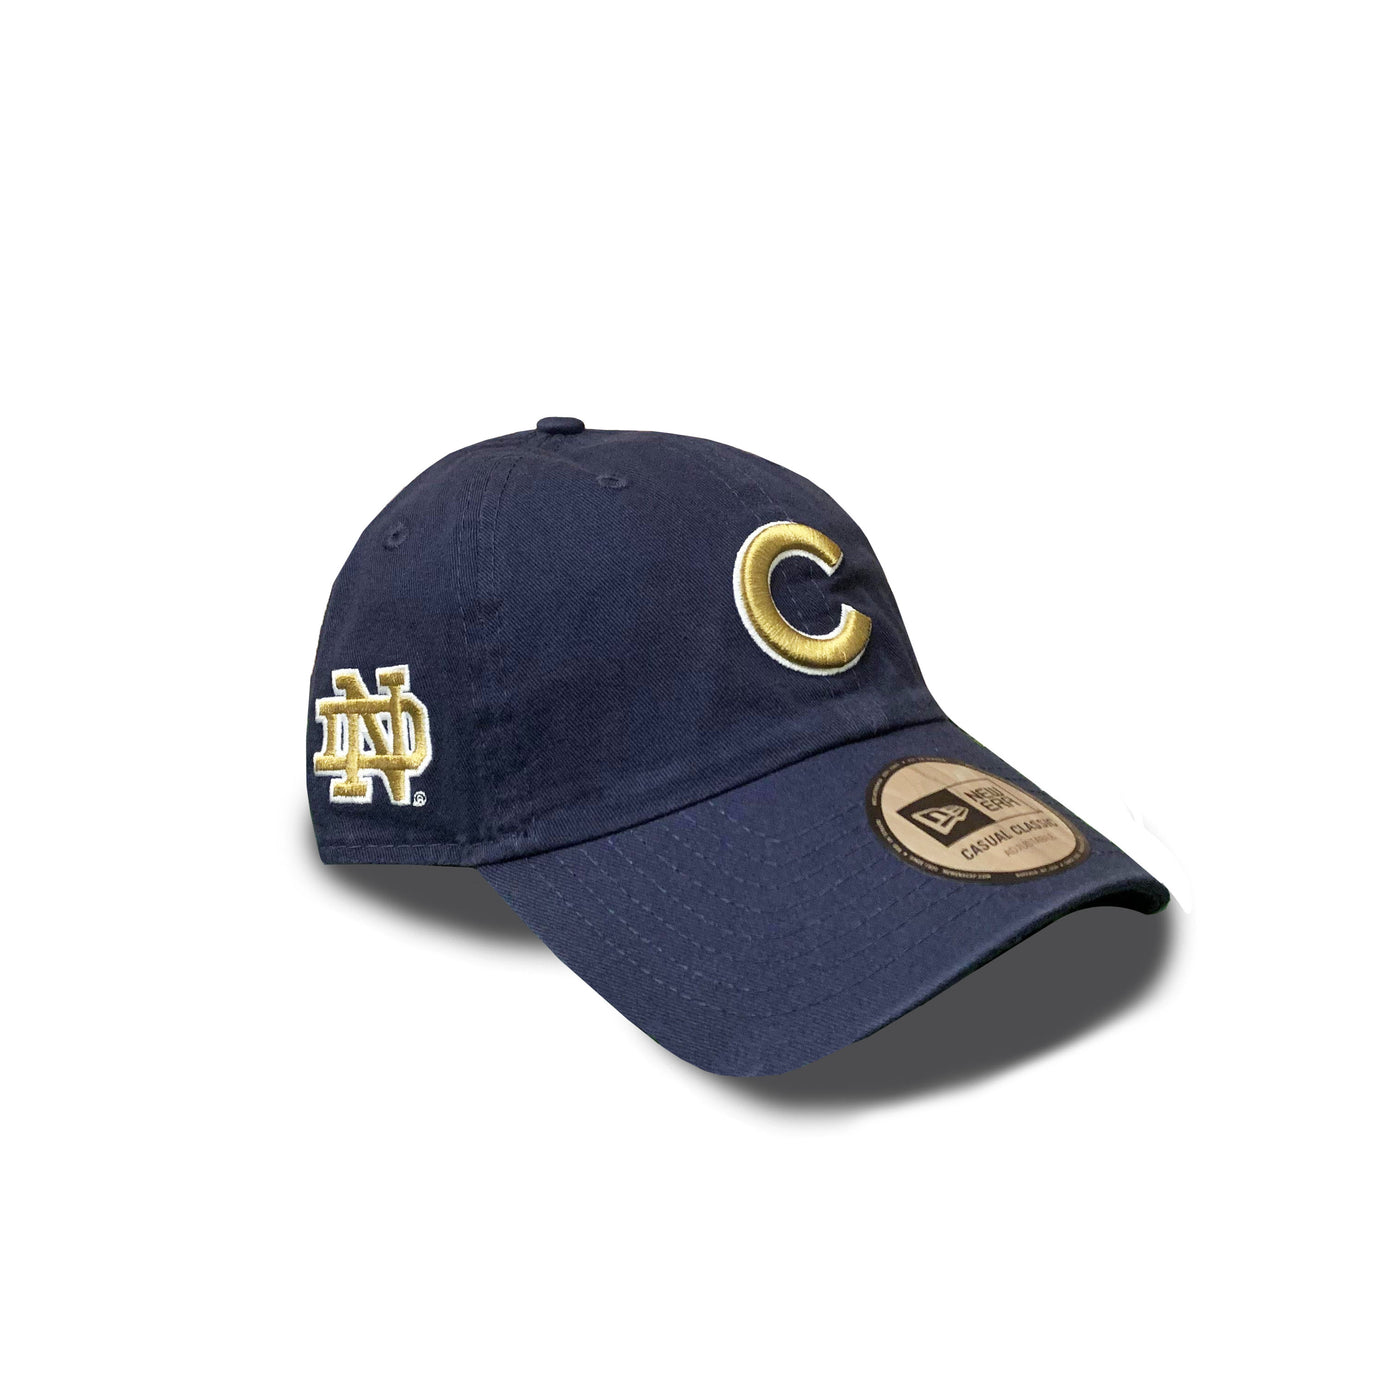 CHICAGO CUBS AND UNIVERSITY OF NOTRE DAME NAVY ADJUSTABLE CAP - Ivy Shop